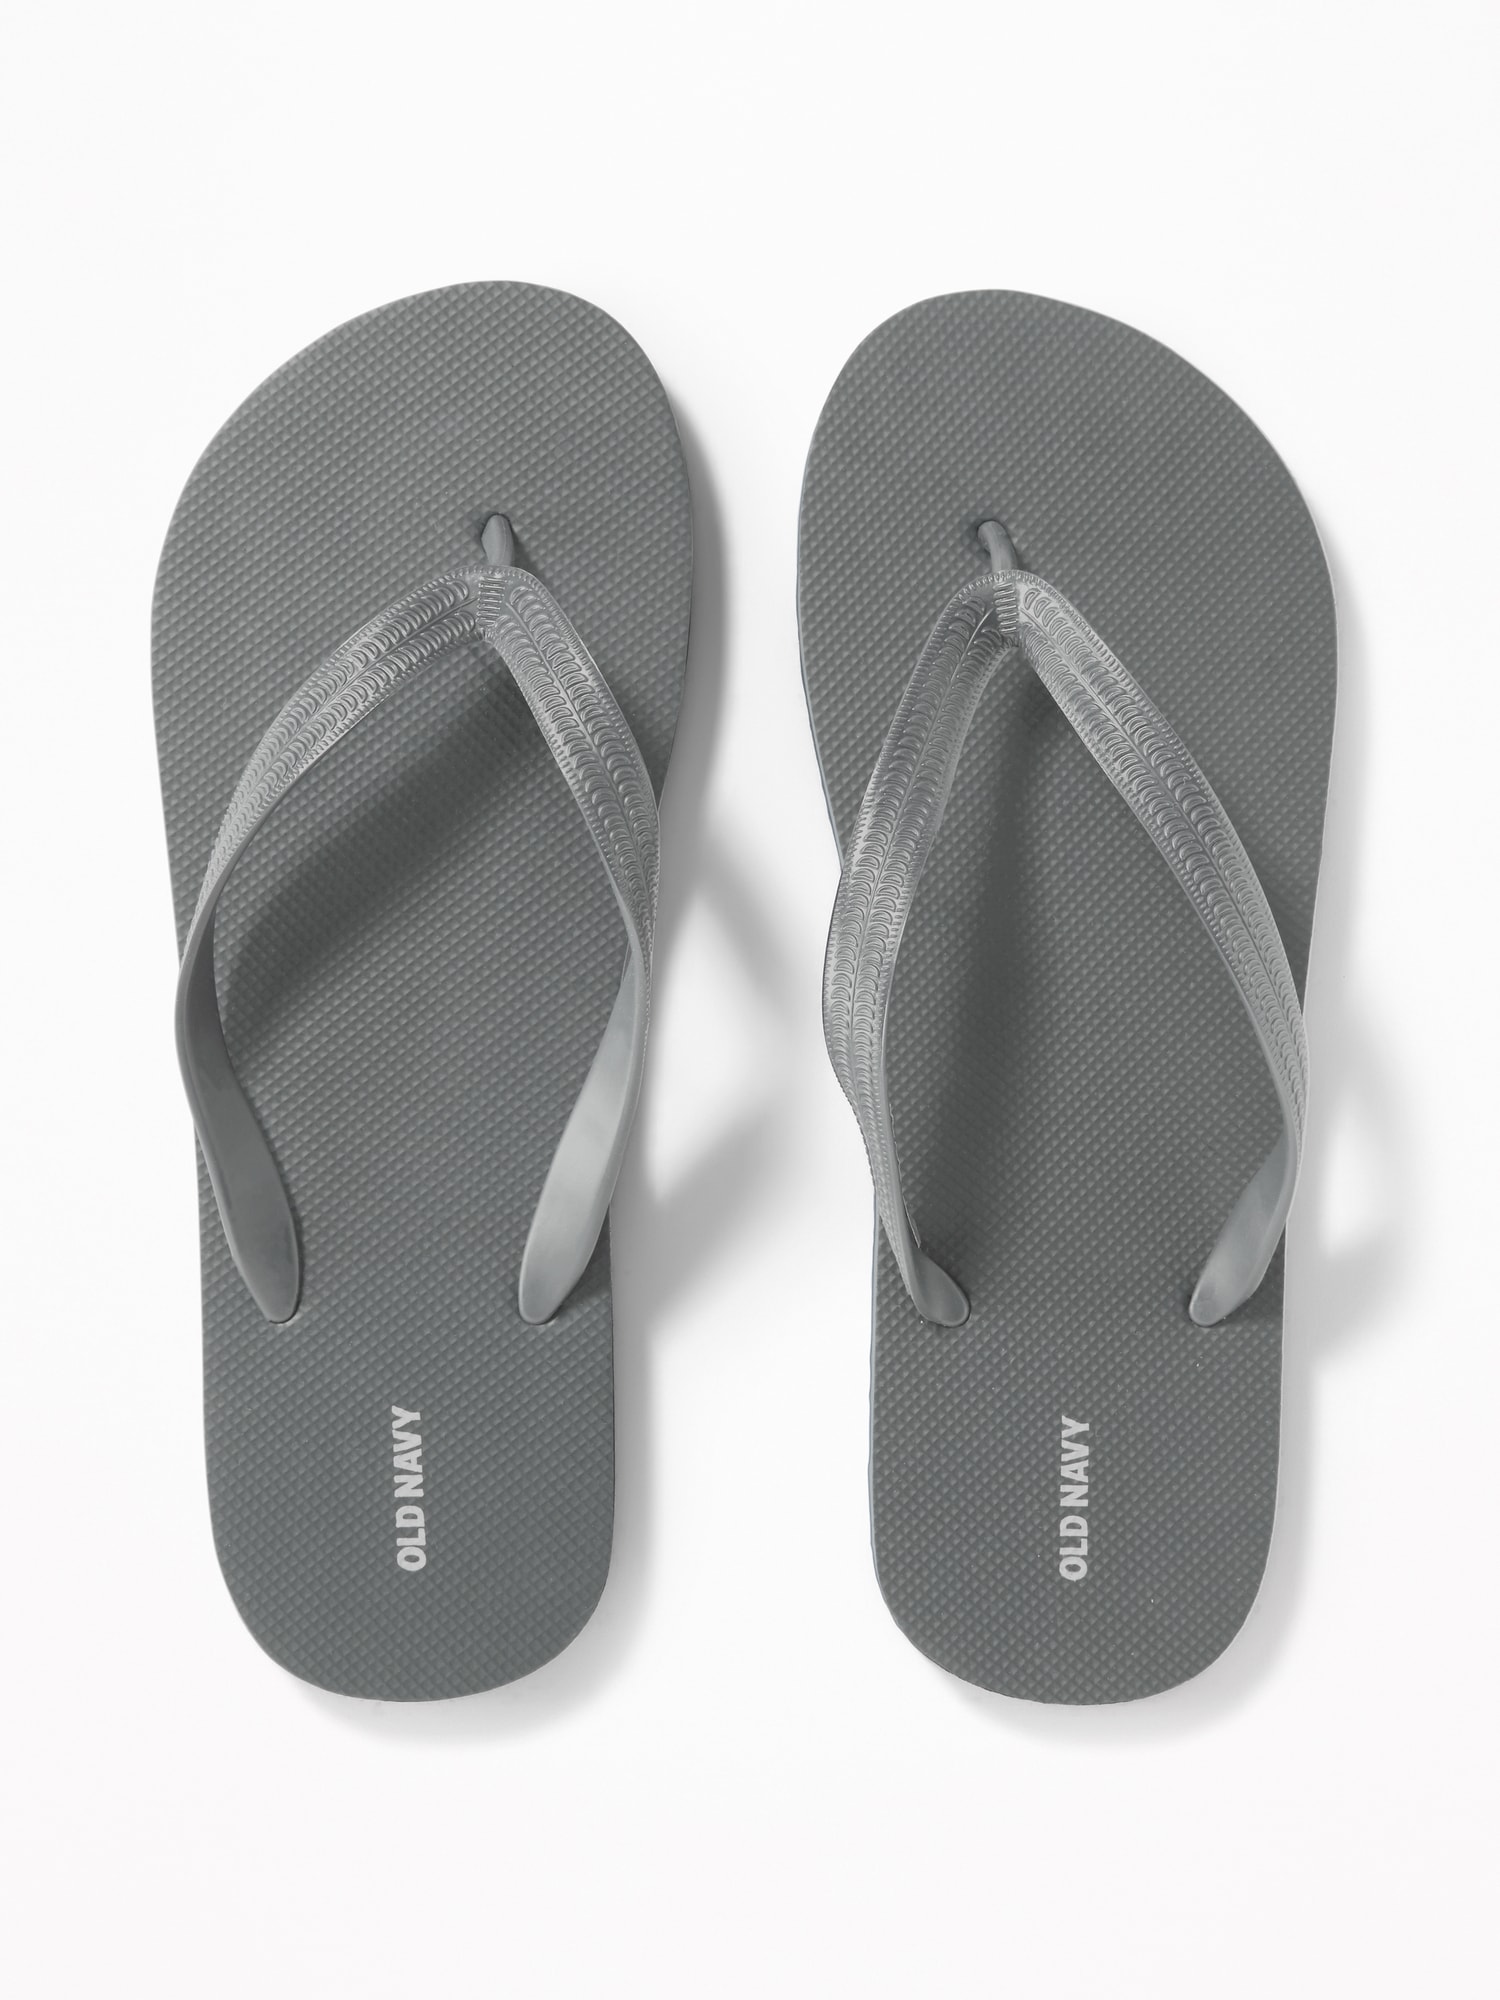 fit flops slippers